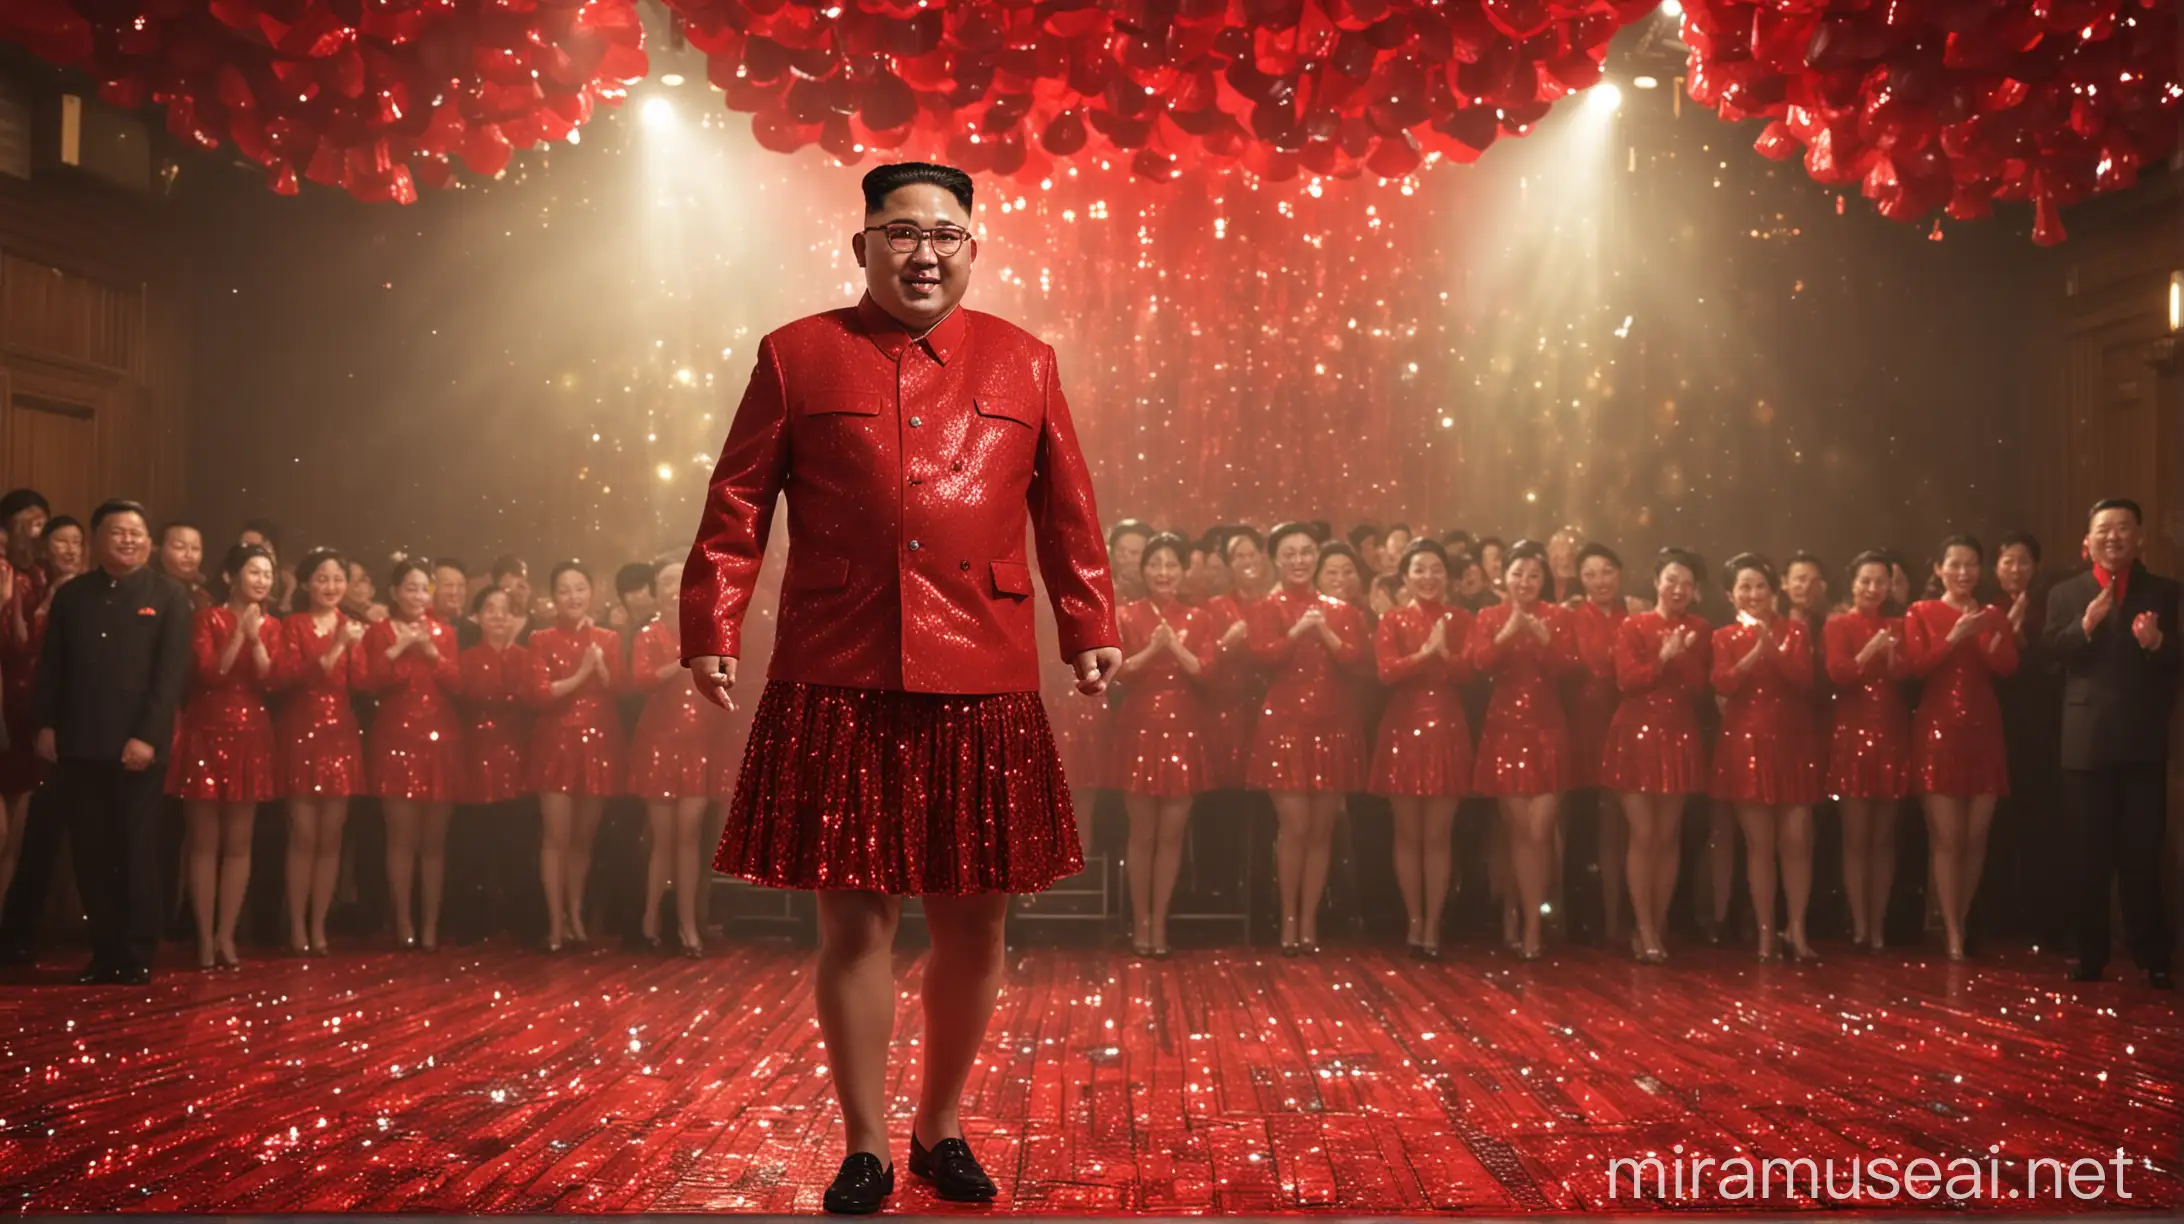 Kim Jong Un in Red Sequined Outfit on Dance Floor